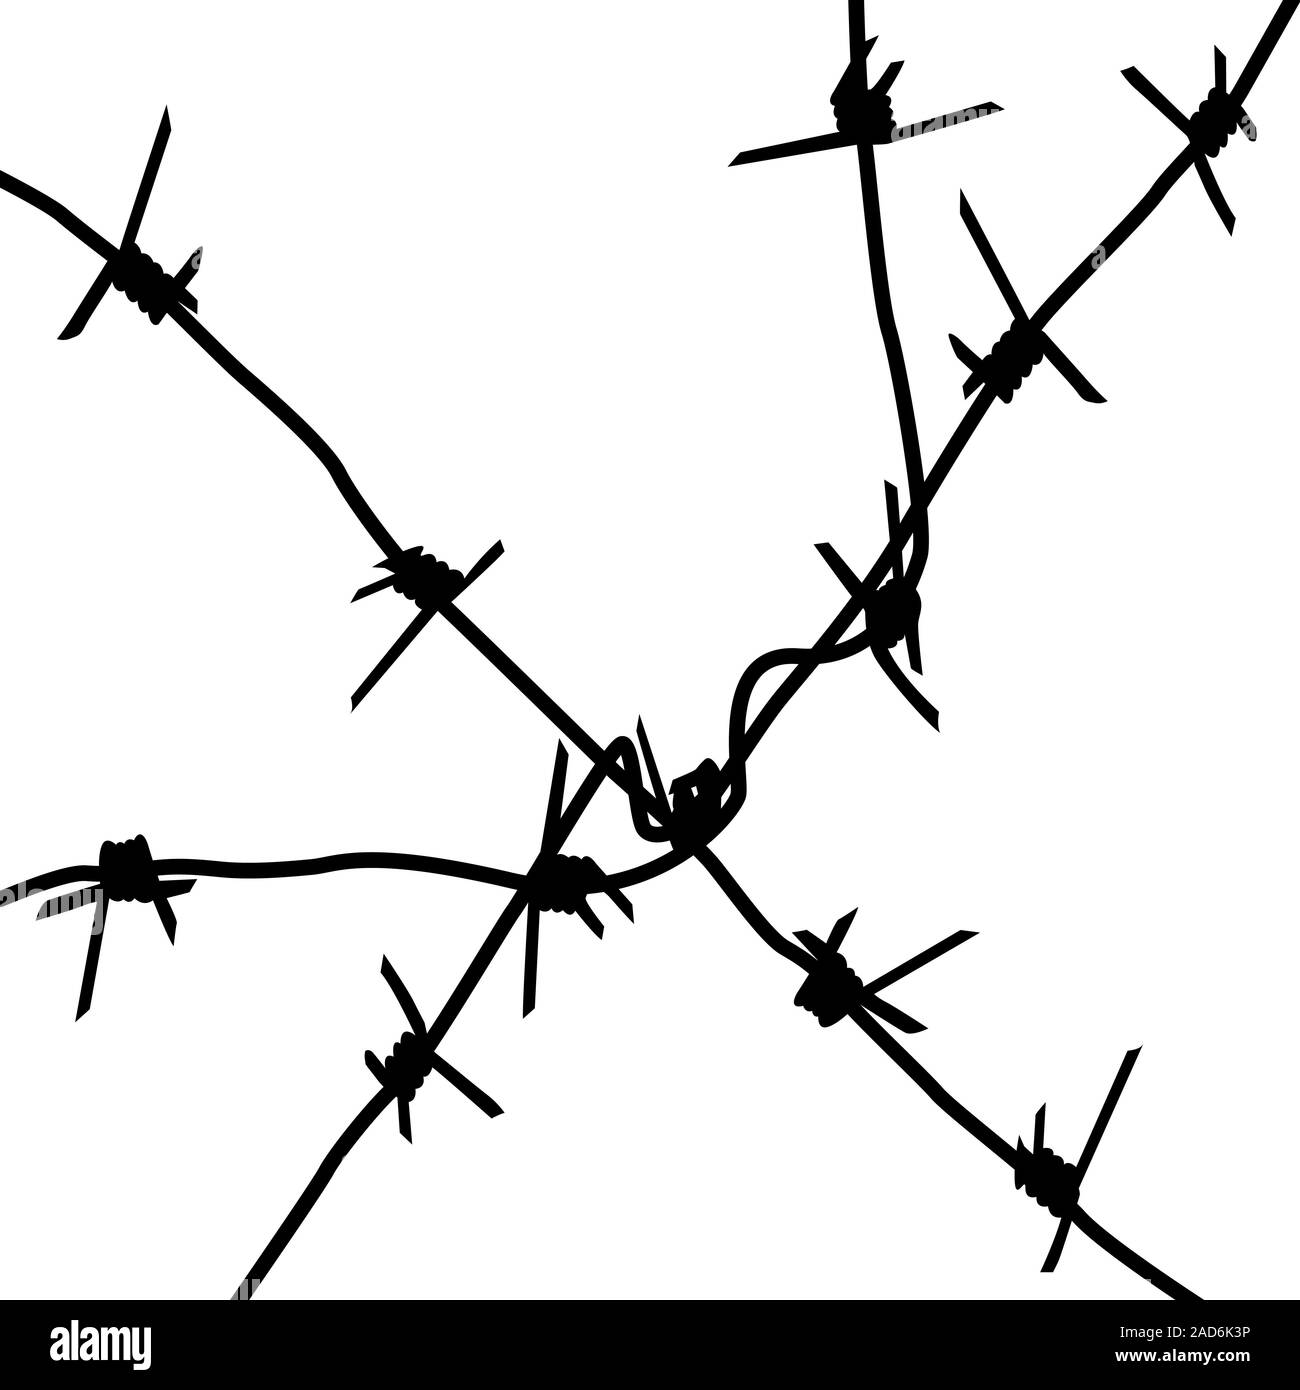 Silhouette barbed wires on a white background. Vector illustration. Stock Vector